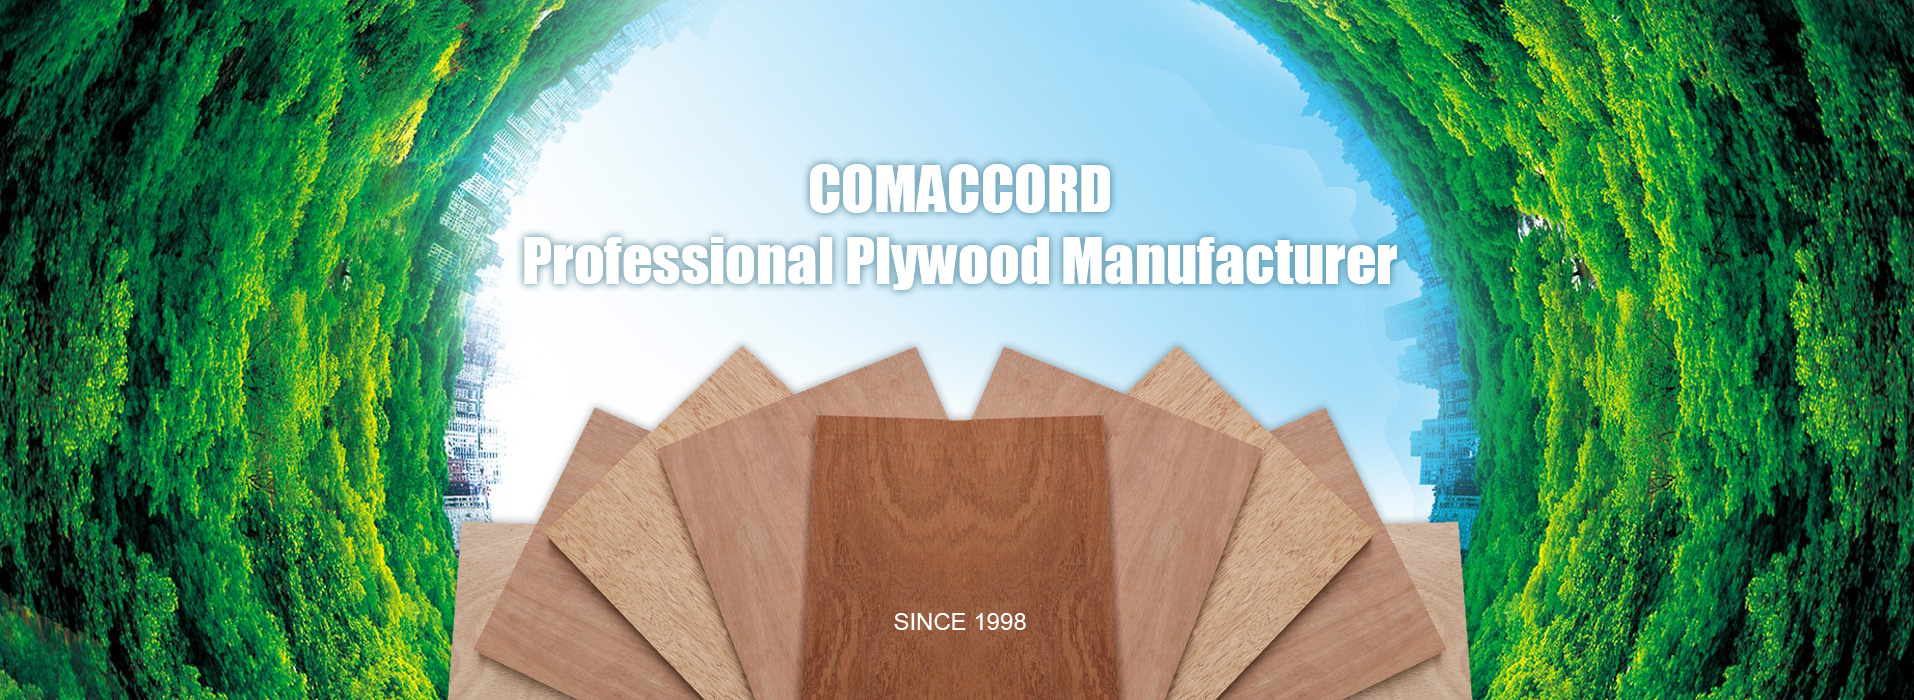 COMACCORD PROFESSIONAL PLYWOOD MANUFACTURE